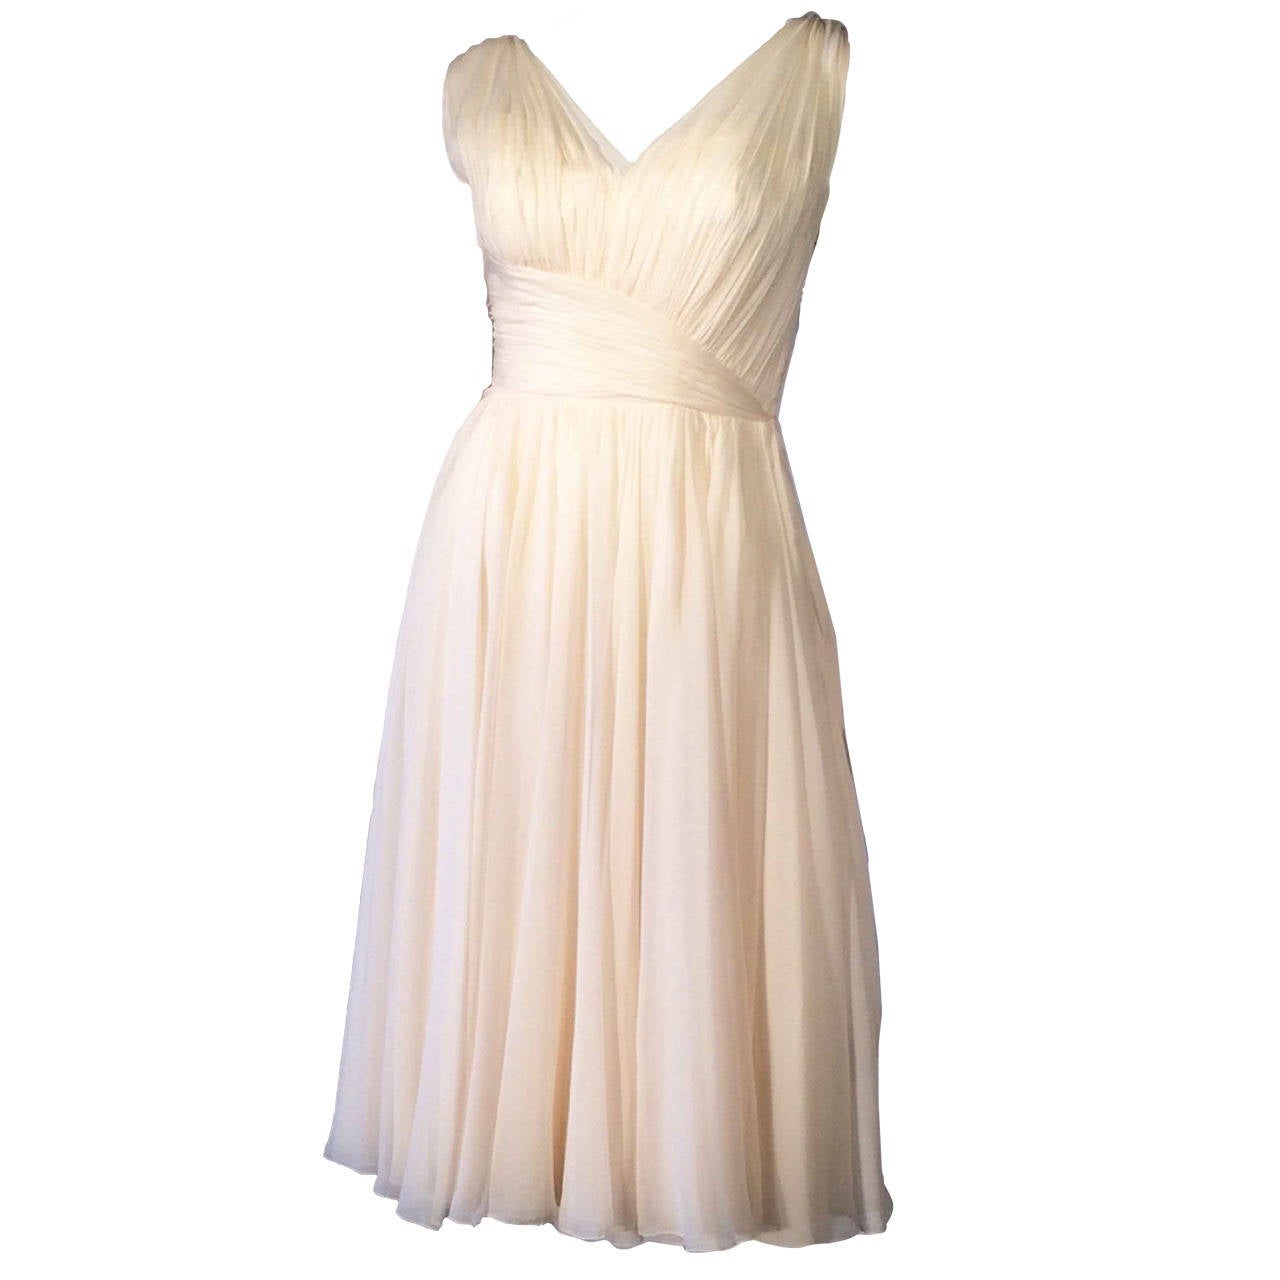 Jean Desses Haute Couture Cocktail Dress 1950s at 1stdibs